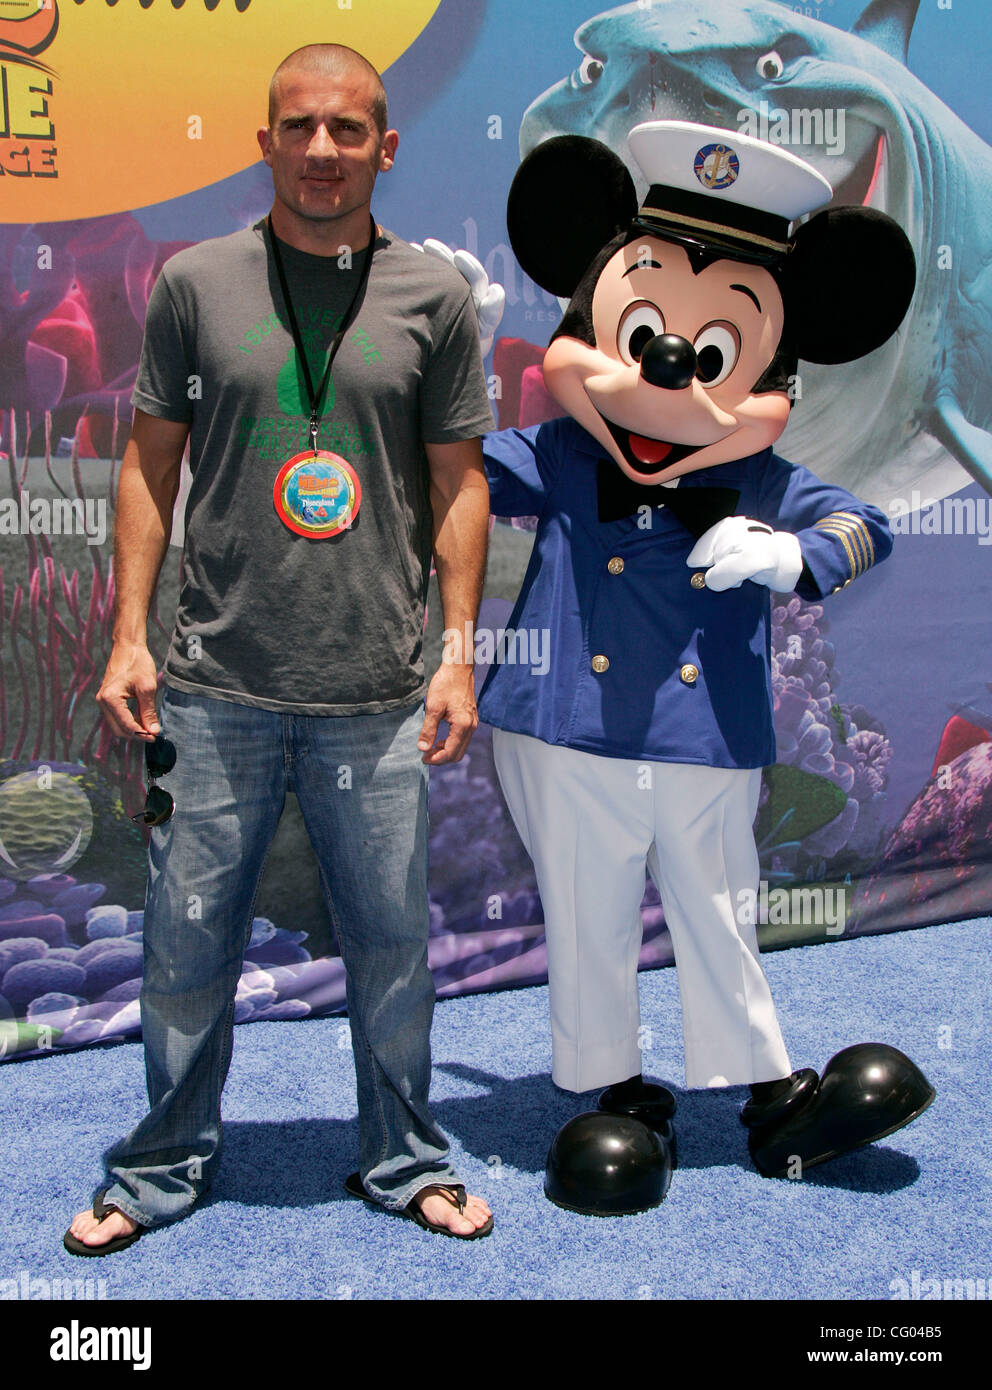 Jun 10, 2007 - Anaheim, California, USA - Actor DOMINIC PURCELL & MICKEY MOUSE at the Finding Nemo Submarine Voyage opening at Disneyland Park.  (Credit Image: © Lisa O'Connor/ZUMA Press) Stock Photo